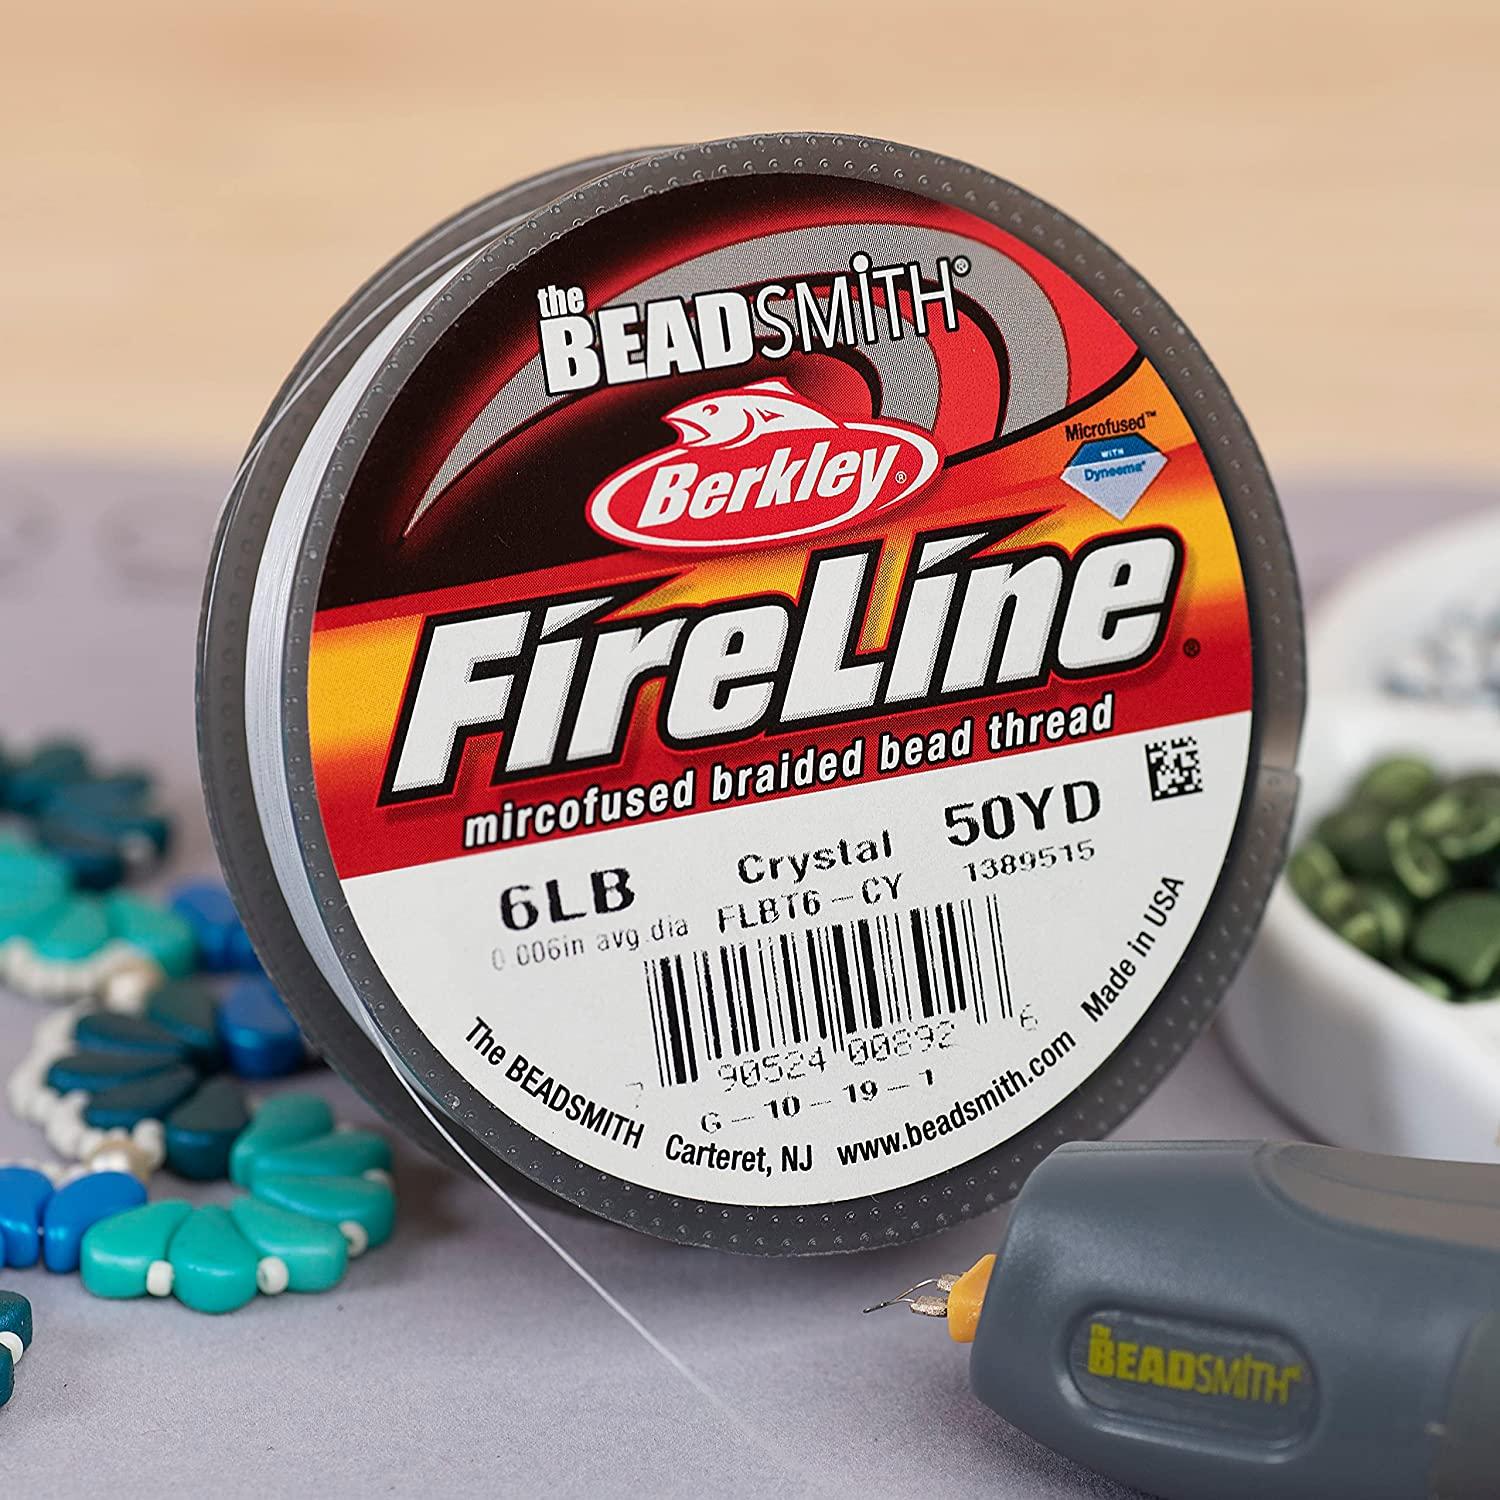 The Beadsmith Fireline by Berkley – Micro-Fused Braided Thread – 6lb. Test,  006”/.15mm Diameter, 50 Yard Spool, Crystal Color – Super Strong Stringing